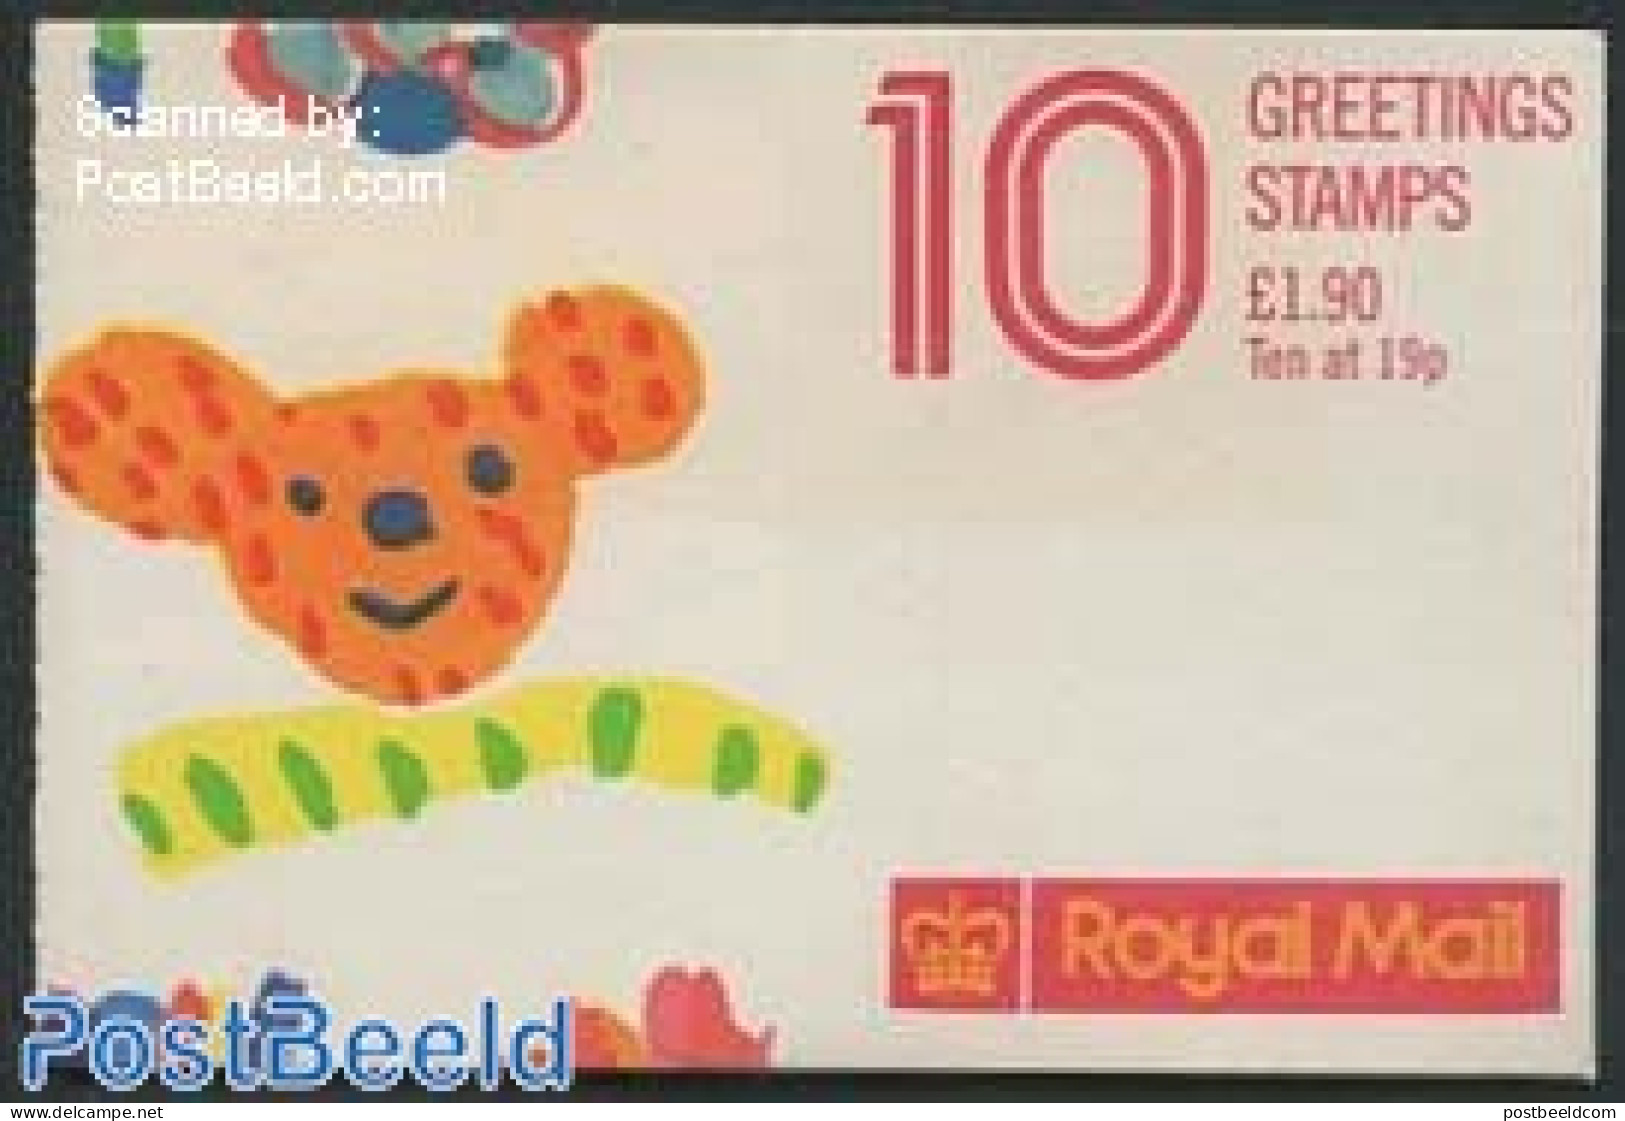 Great Britain 1989 Greeting Stamps Booklet (outside Cover May Vary), Mint NH, Nature - Various - Flowers & Plants - St.. - Neufs